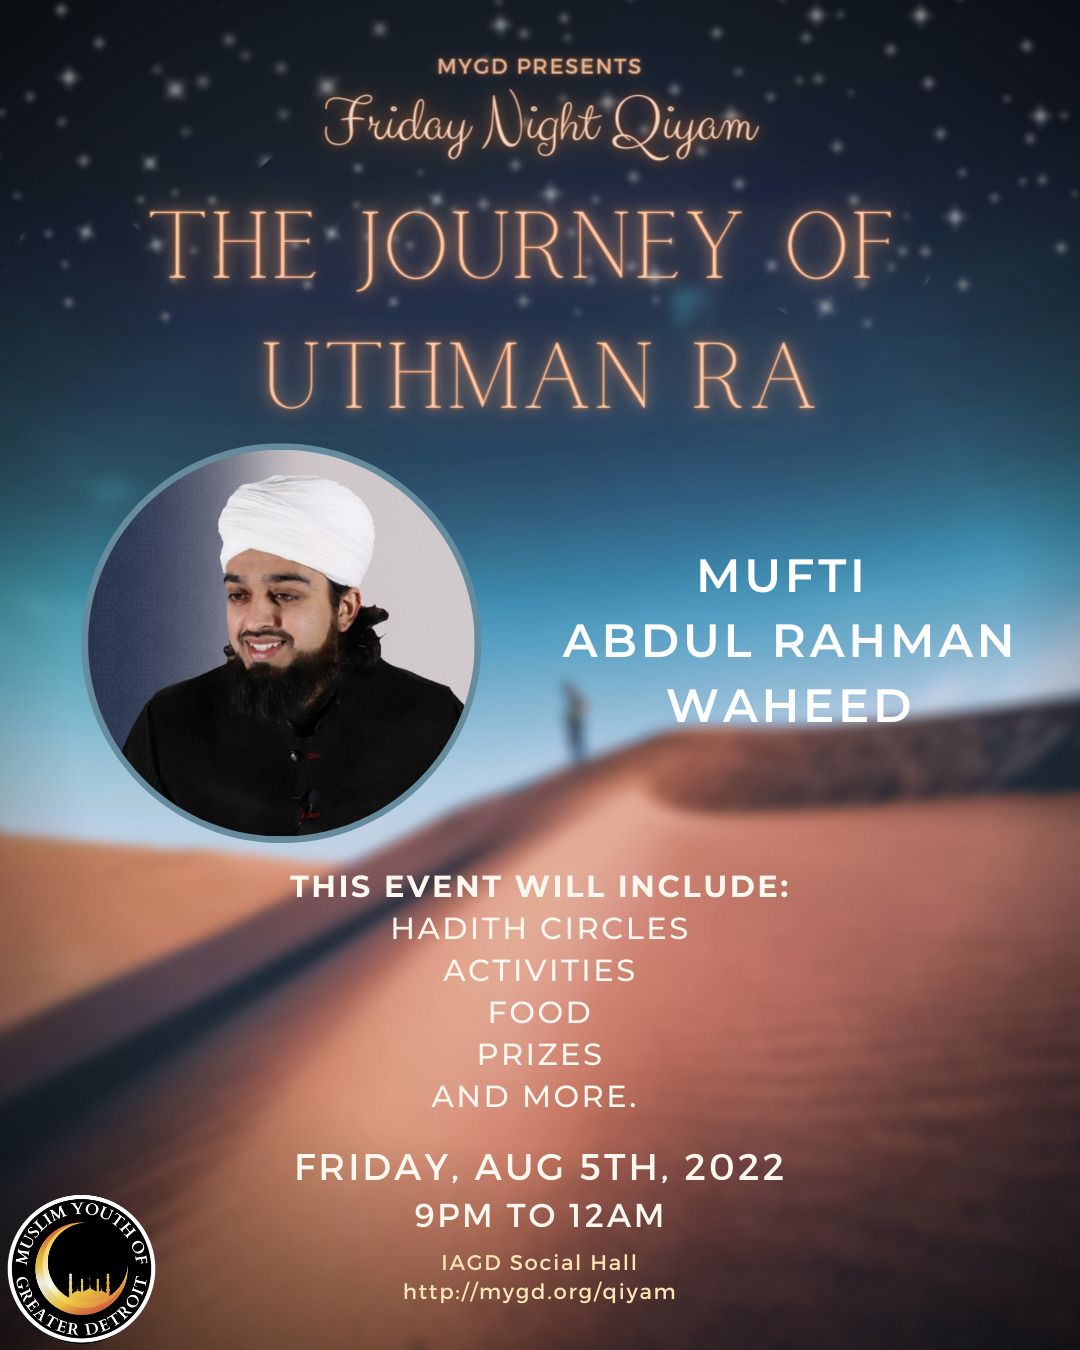 The Journey of Uthan (RA)